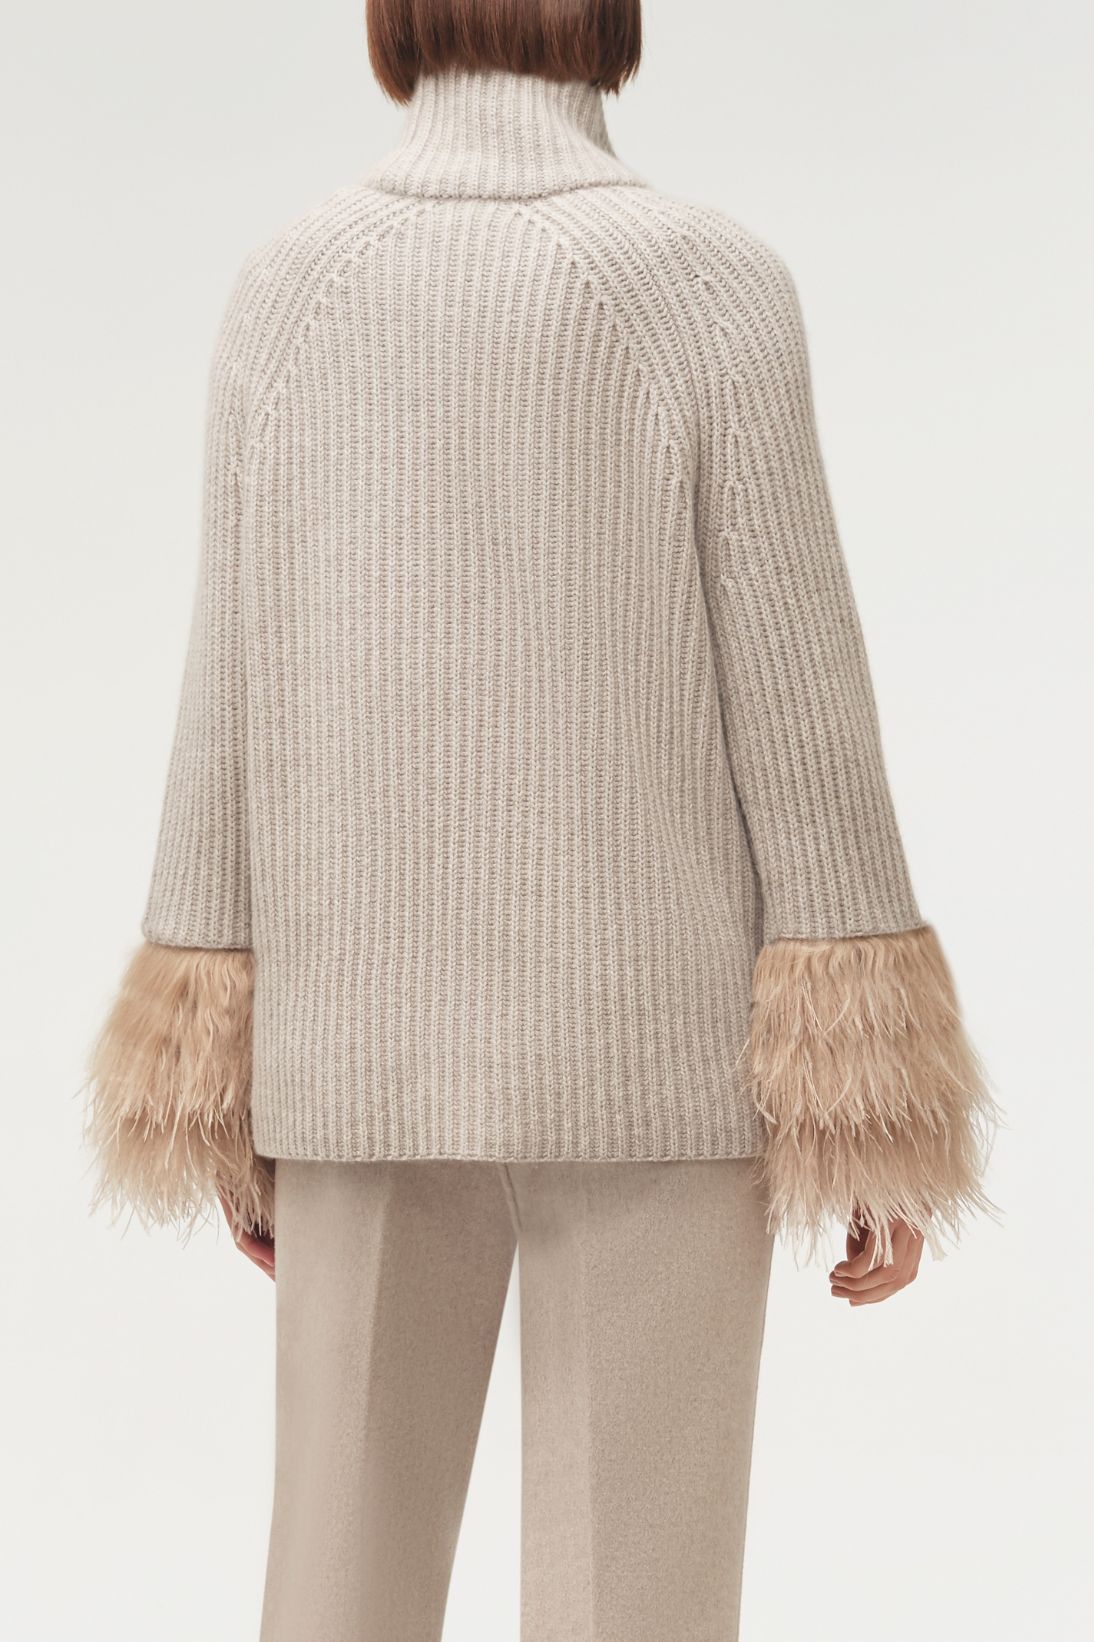 RIBBED TURTLENECK WITH DETACHABLE CUFFS